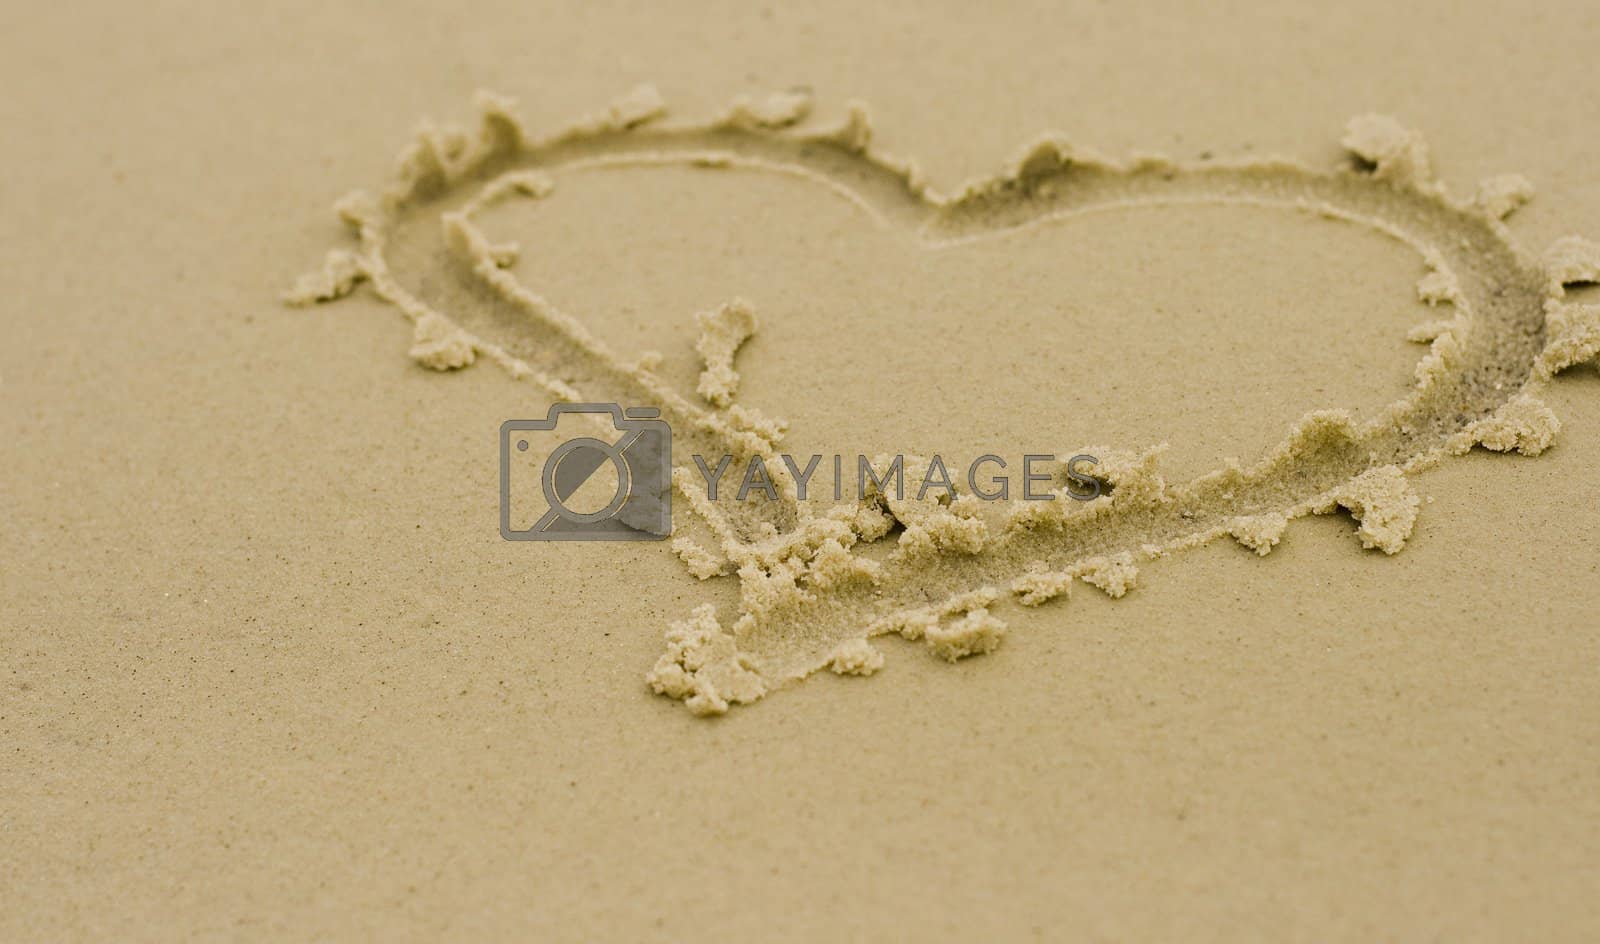 Royalty free image of heart on sand by marylooo